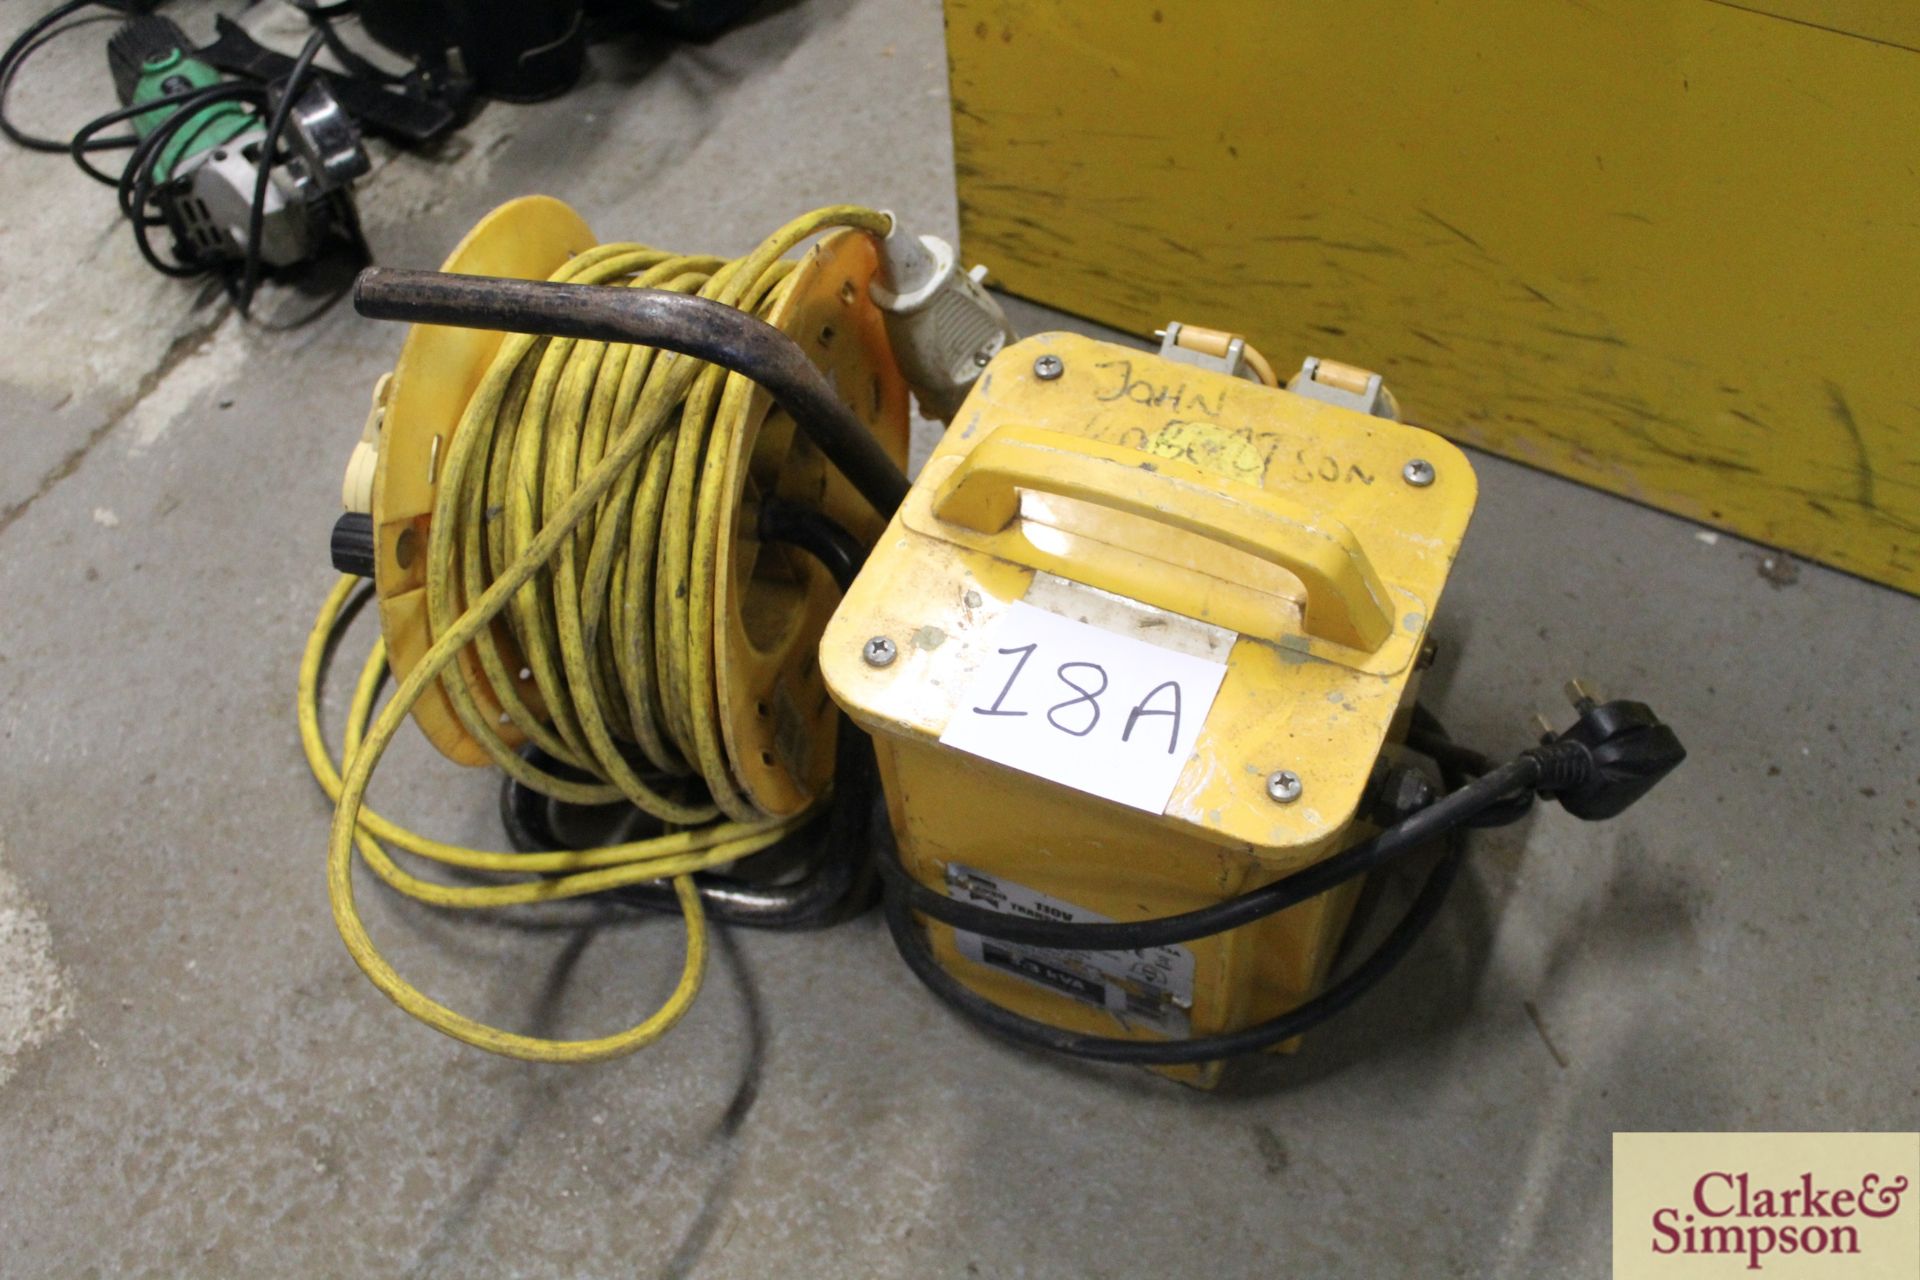 Electrical transformer with an extension cable.